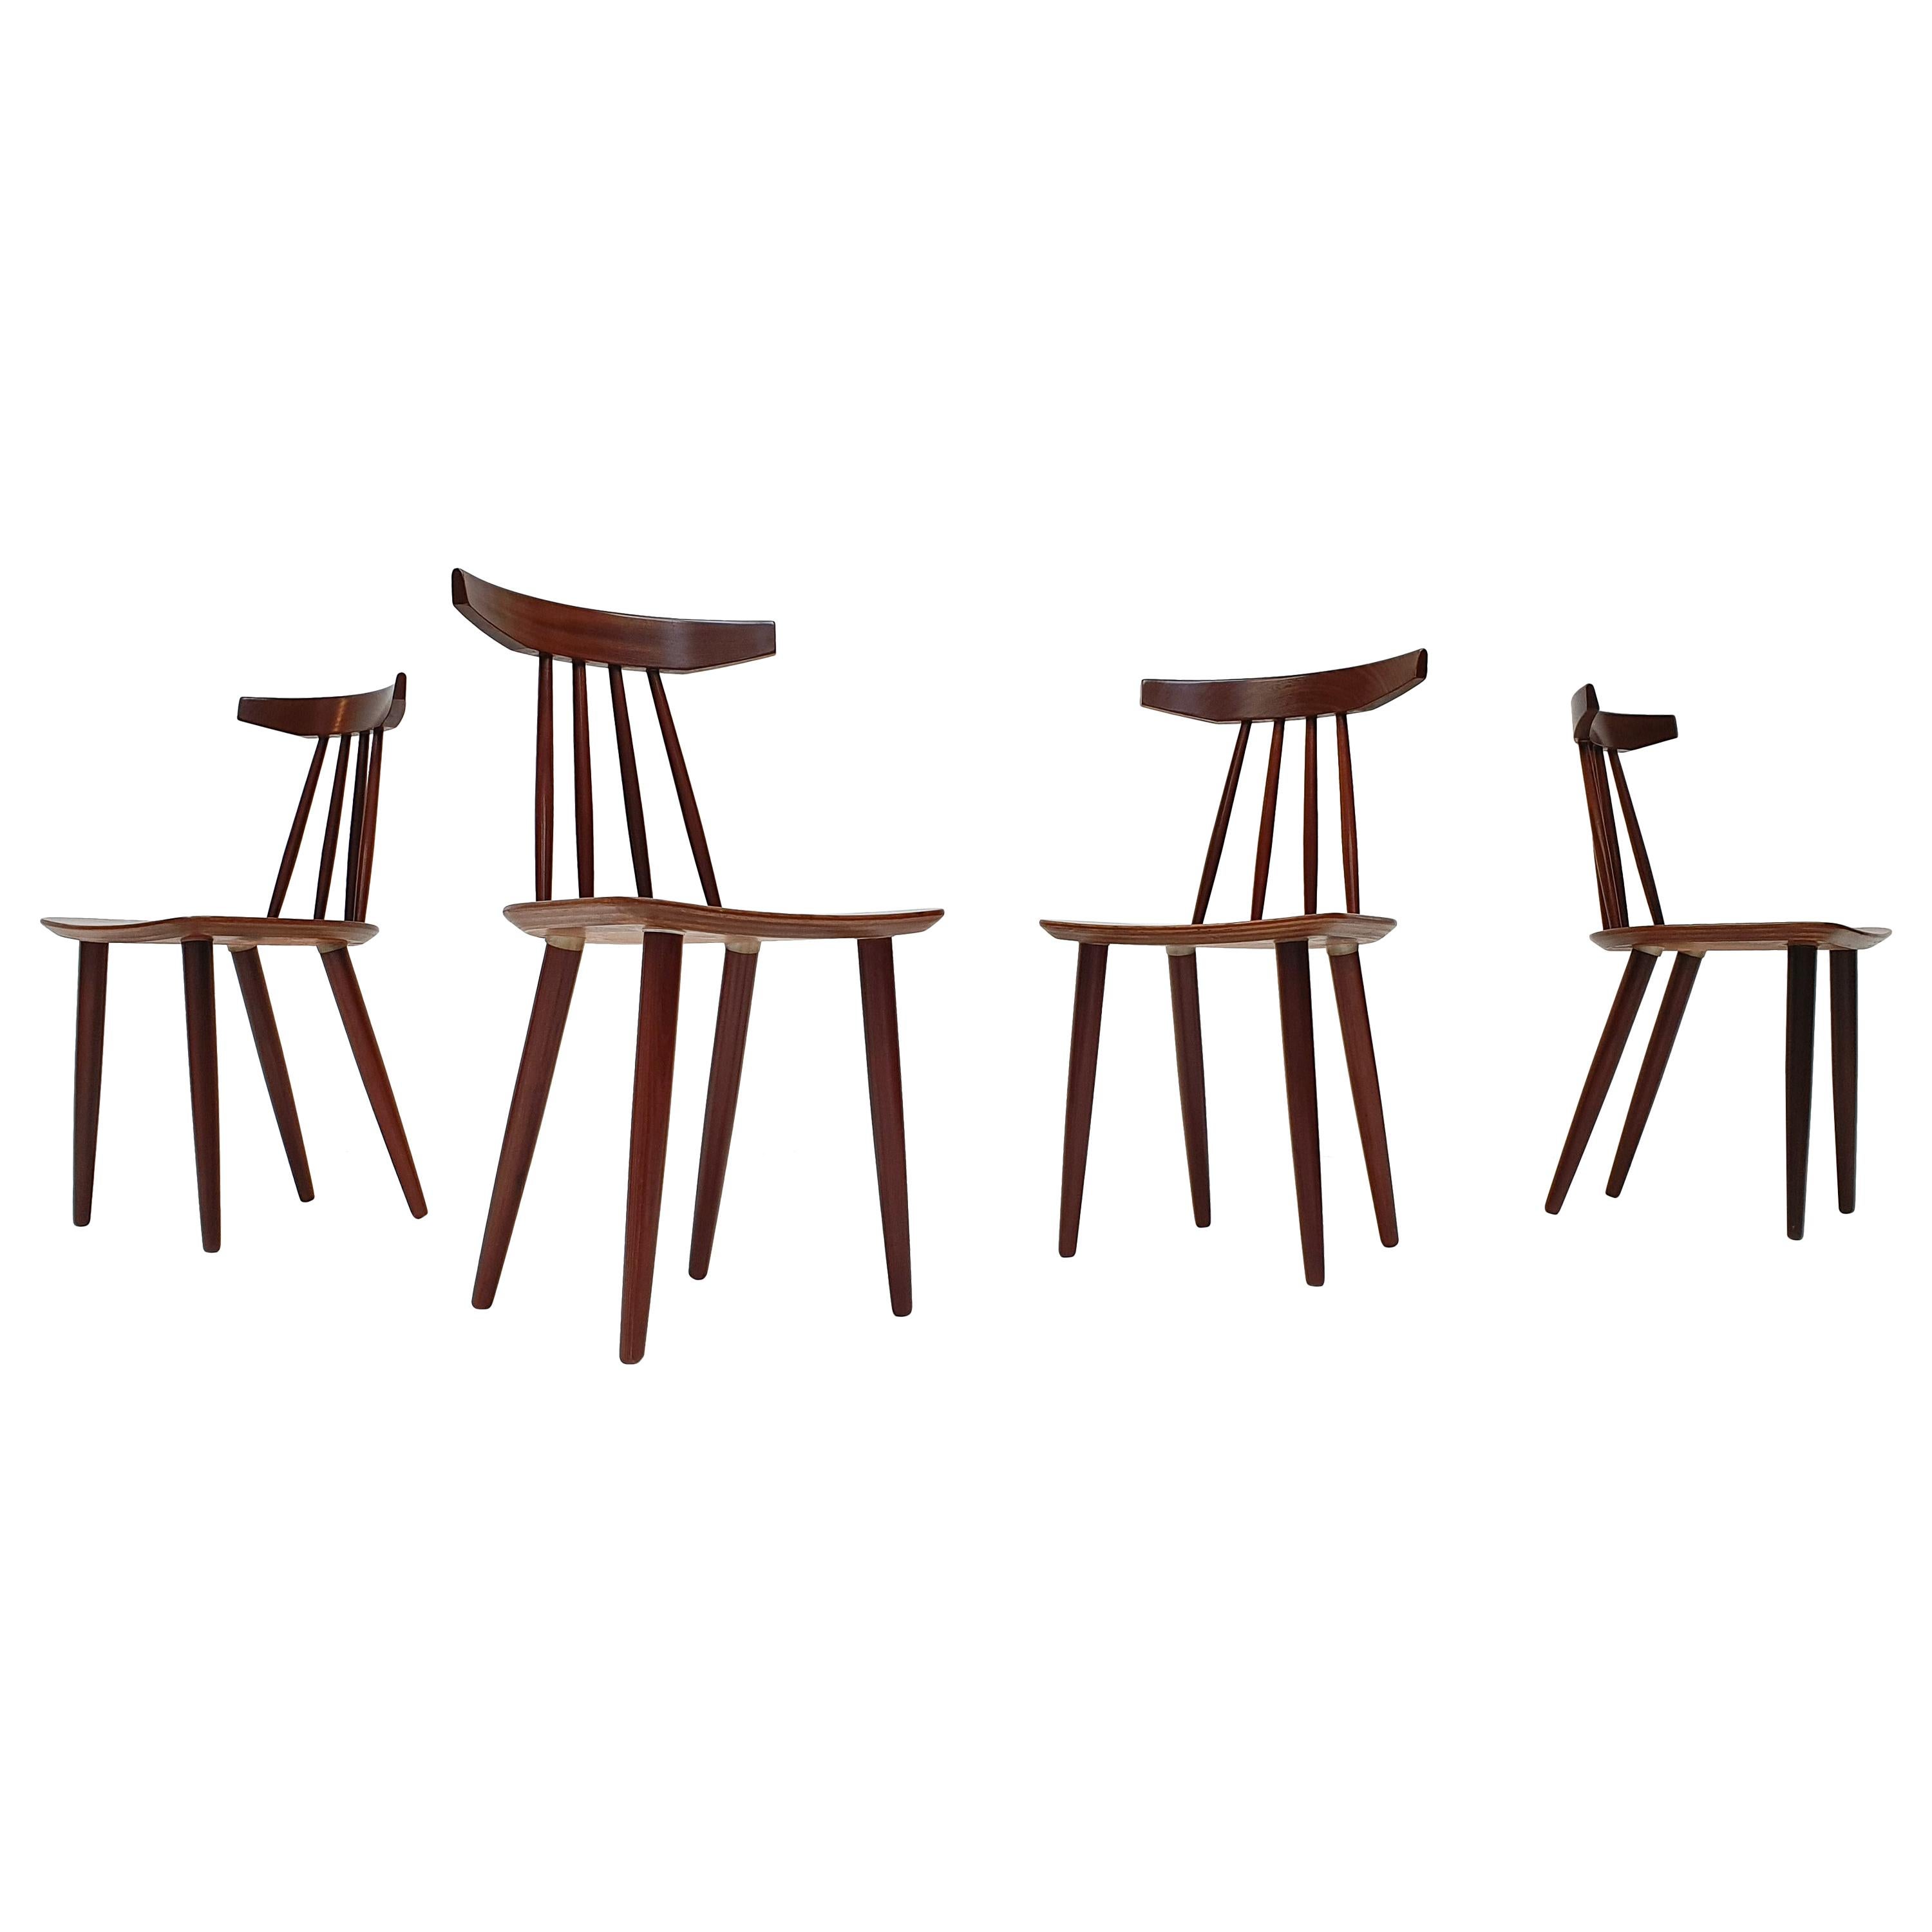 Set of 4, Poul Volther "307" Chairs in Teak for Frem Røjle, Denmark, 1960s